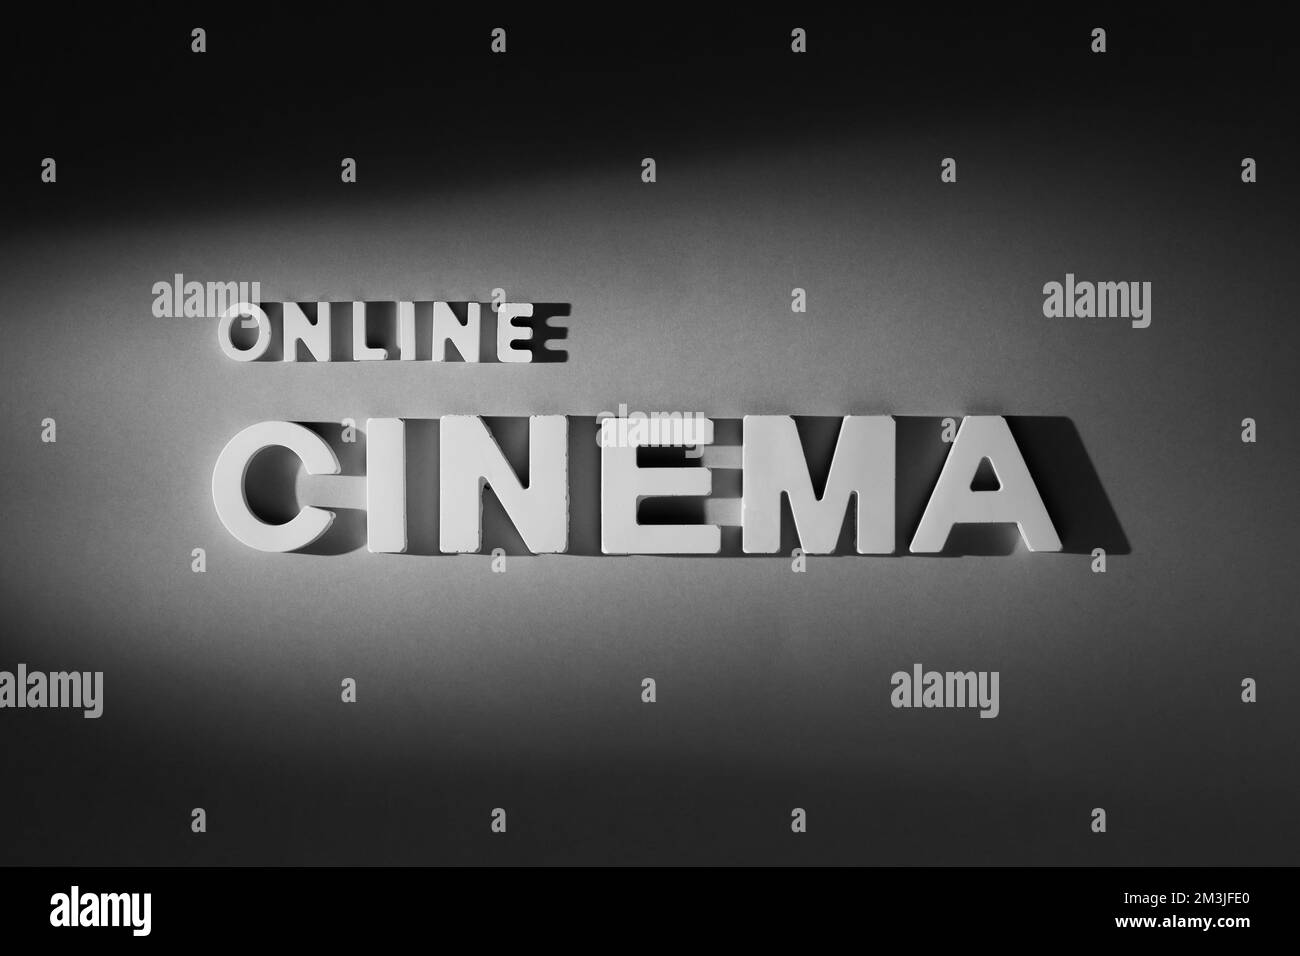 Online Cinema - Old movie style inscription by moulded letters. Black and white photograph Stock Photo